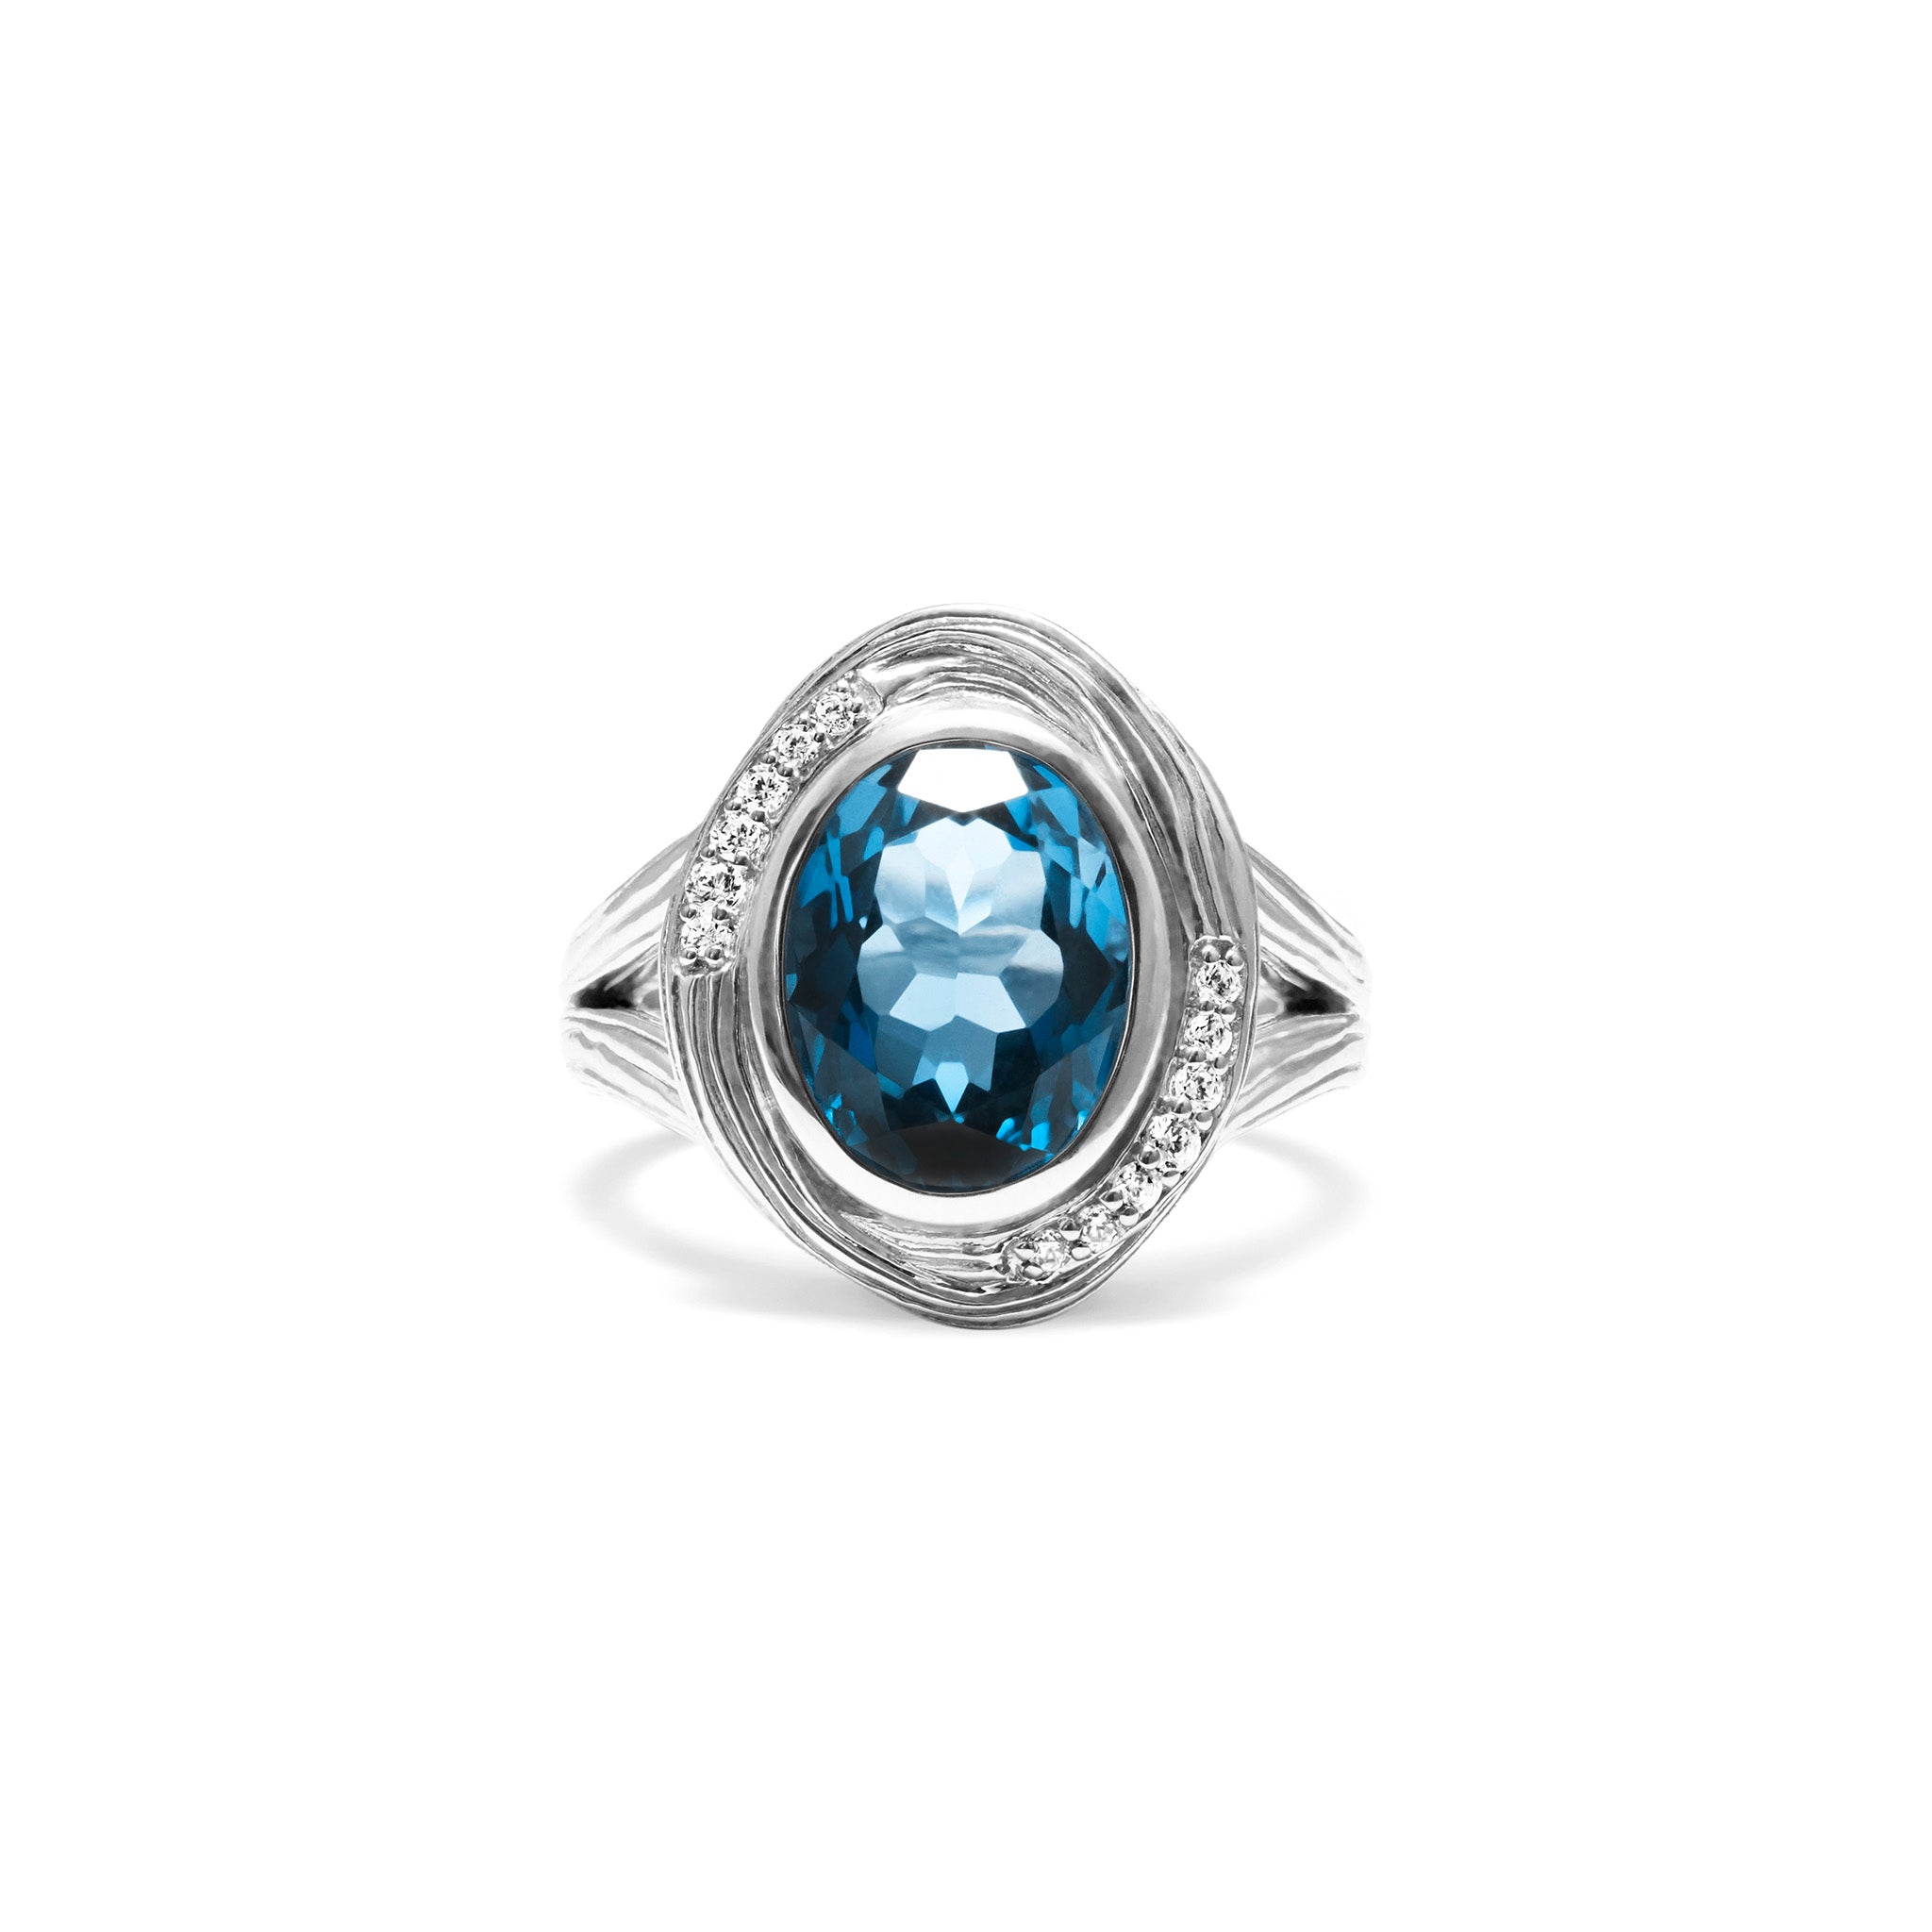 Santorini Oval Ring With London Blue Topaz And Diamonds